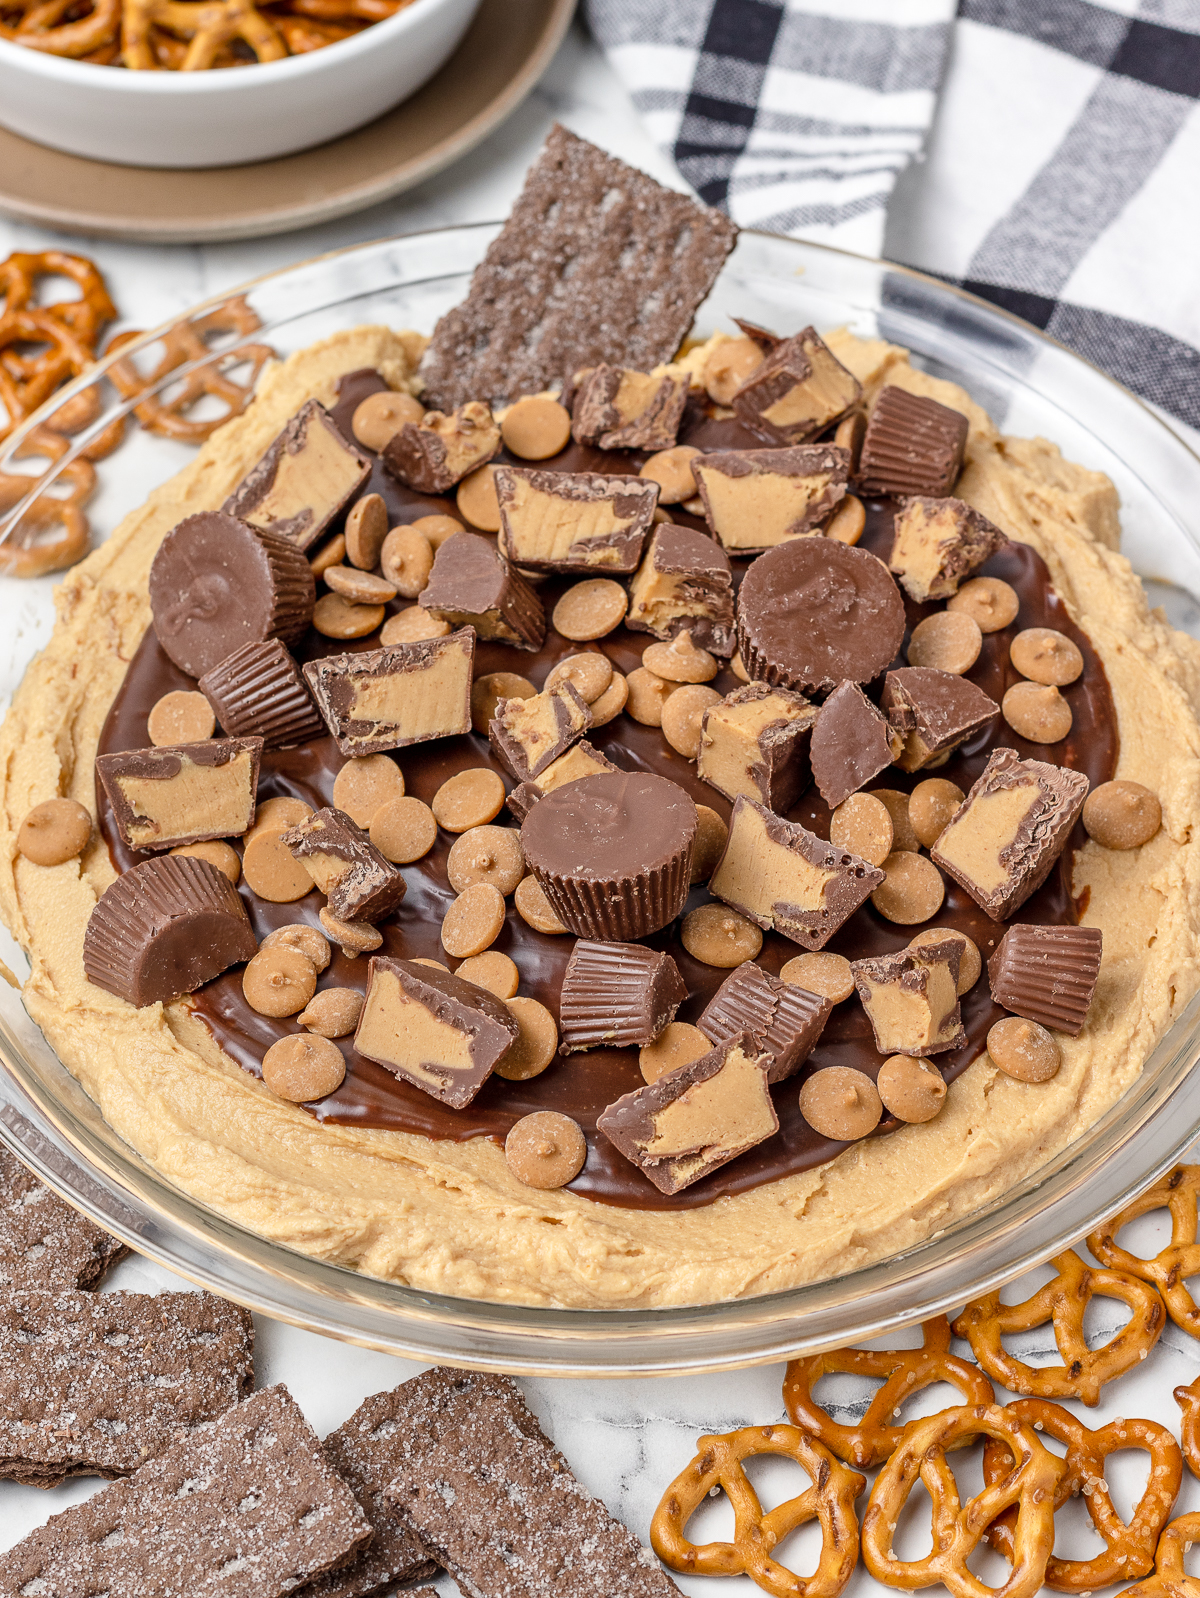 Pie plate filled with Chocolate Peanut Butter Pie Dip and tons of dippers on the side for dipping.